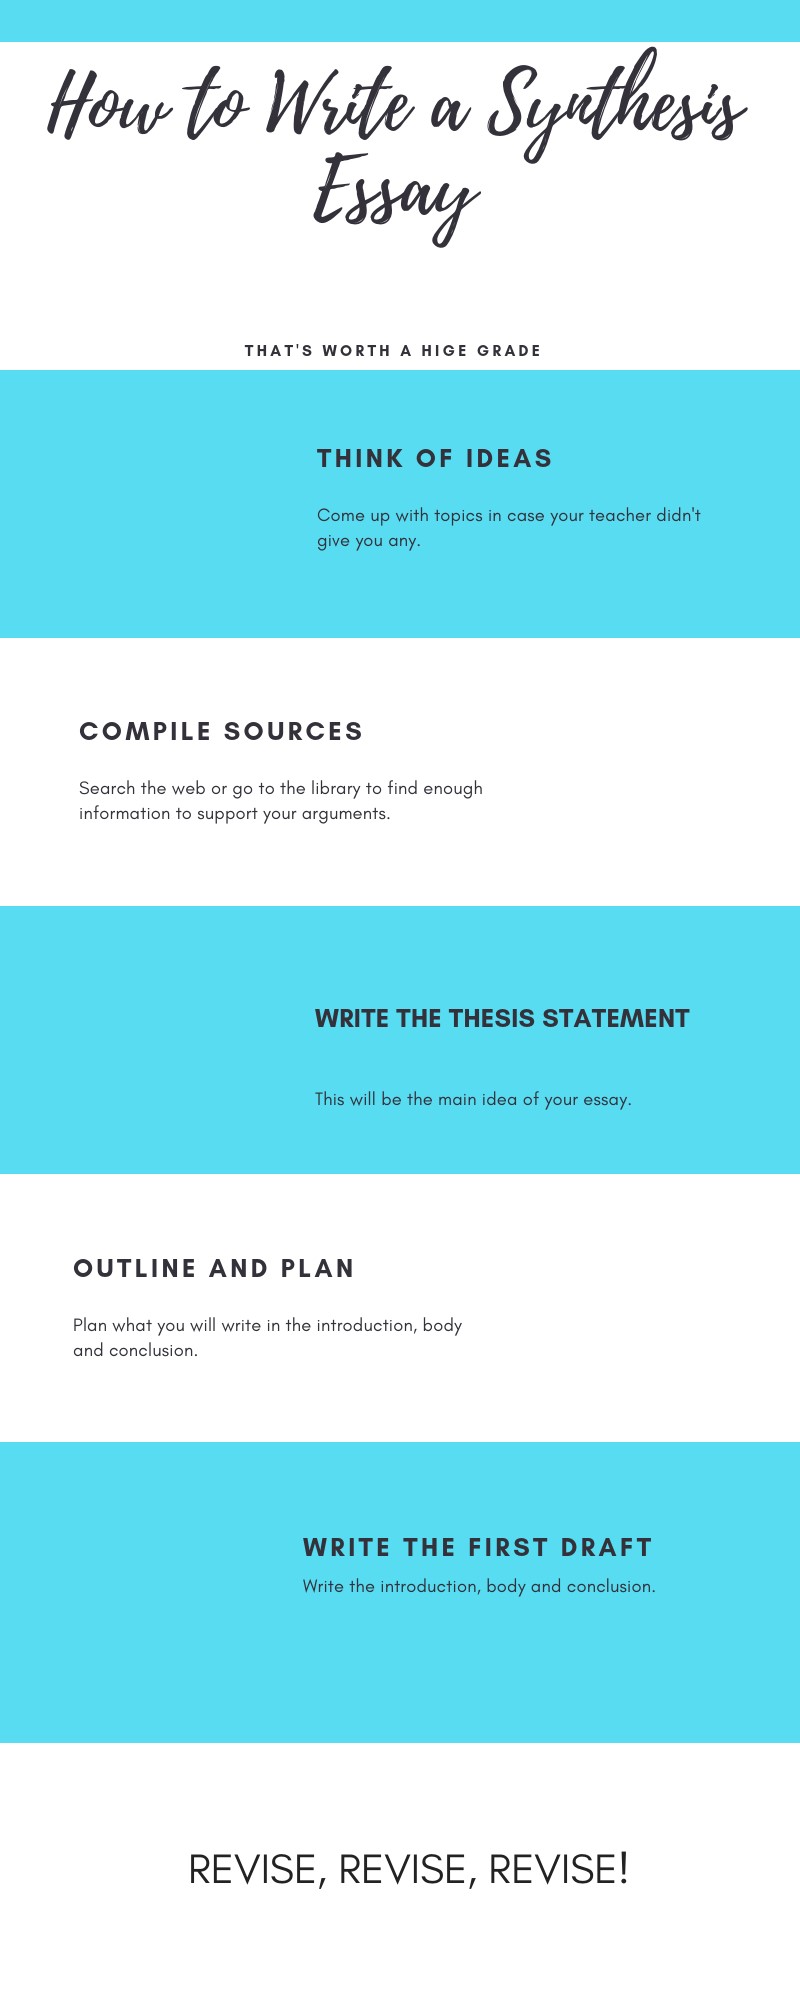 explanatory synthesis thesis statement examples